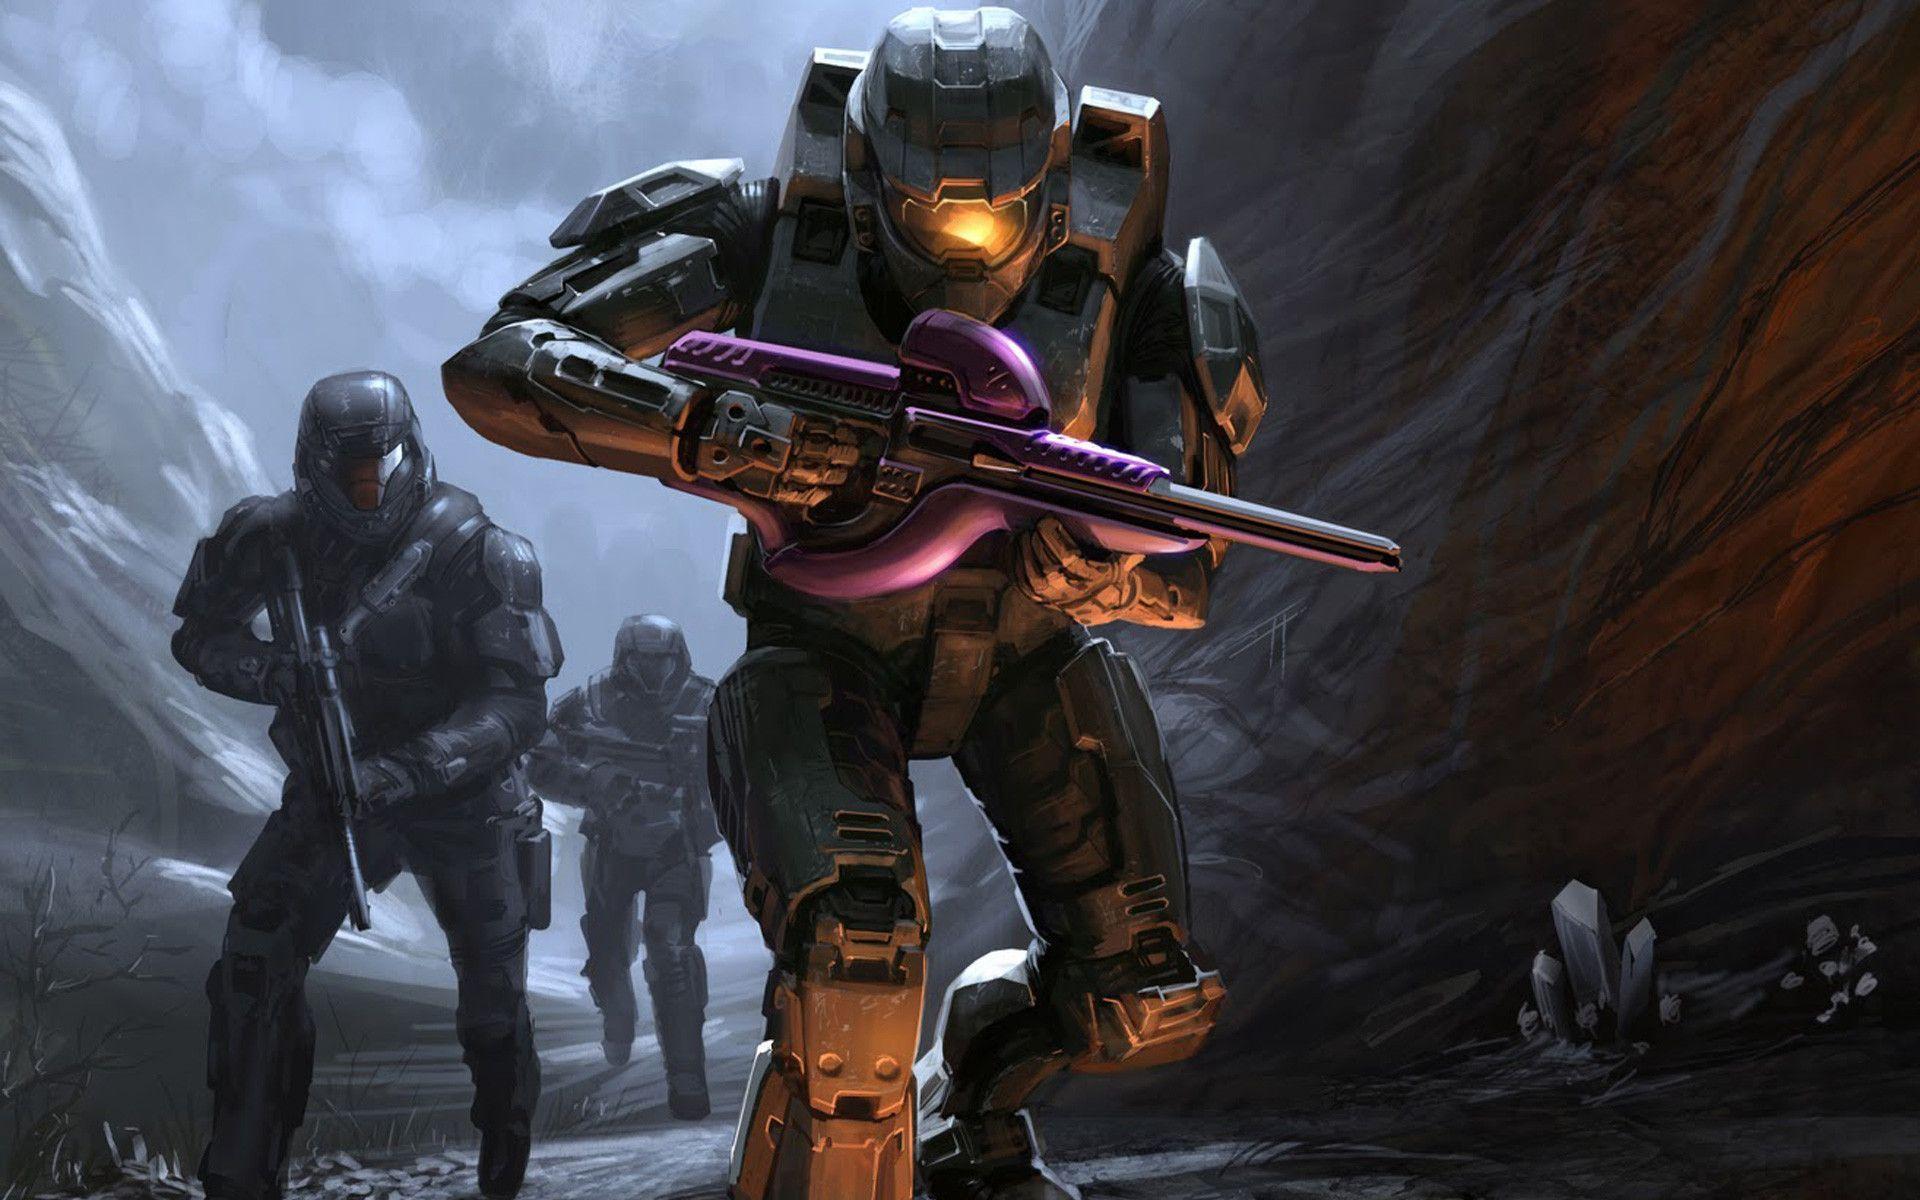 Wallpaper For > Halo 3 Wallpaper Master Chief And Arbiter